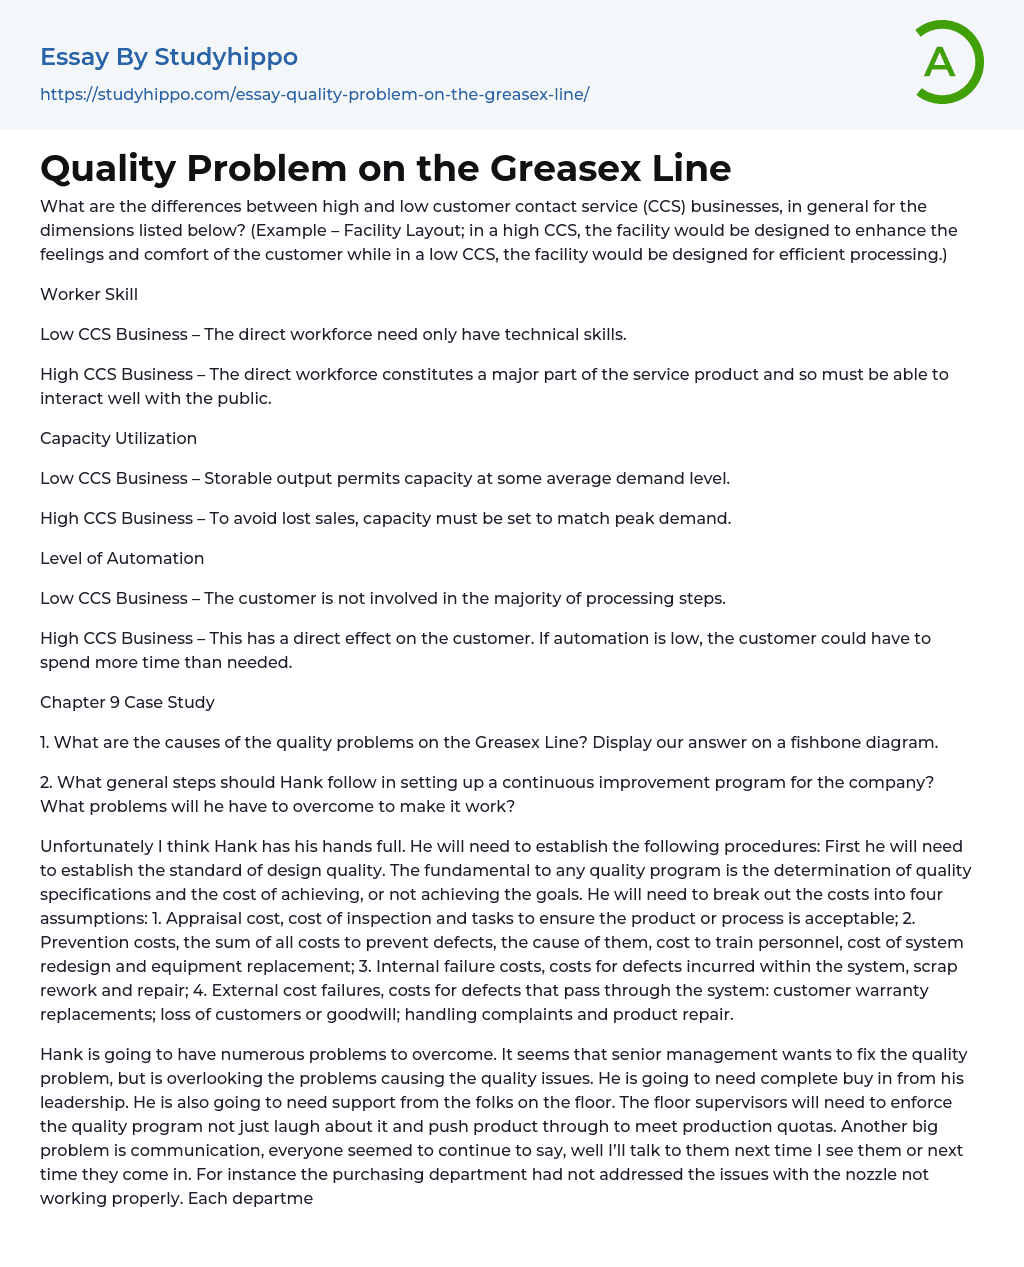 Quality Problem on the Greasex Line Essay Example